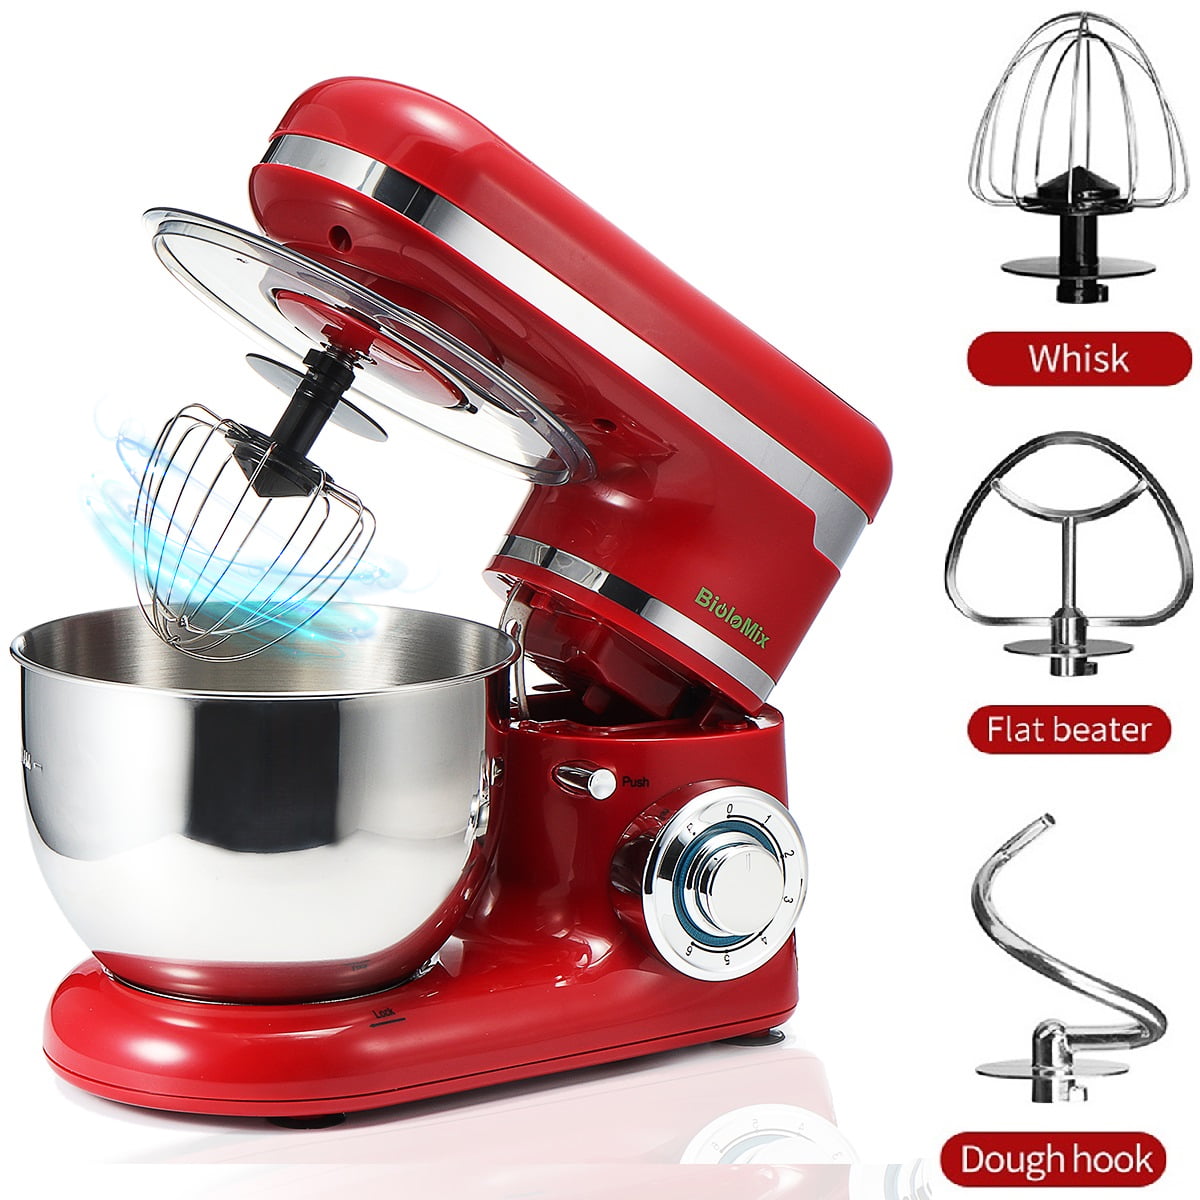 Stand Mixer White-Hand Mixer Beaters & Dough Hook 5 Speeds Electric Mixer 2 in 1 Hand Mixer with 4 Quarts Stainless Steel Mixing Bowl 